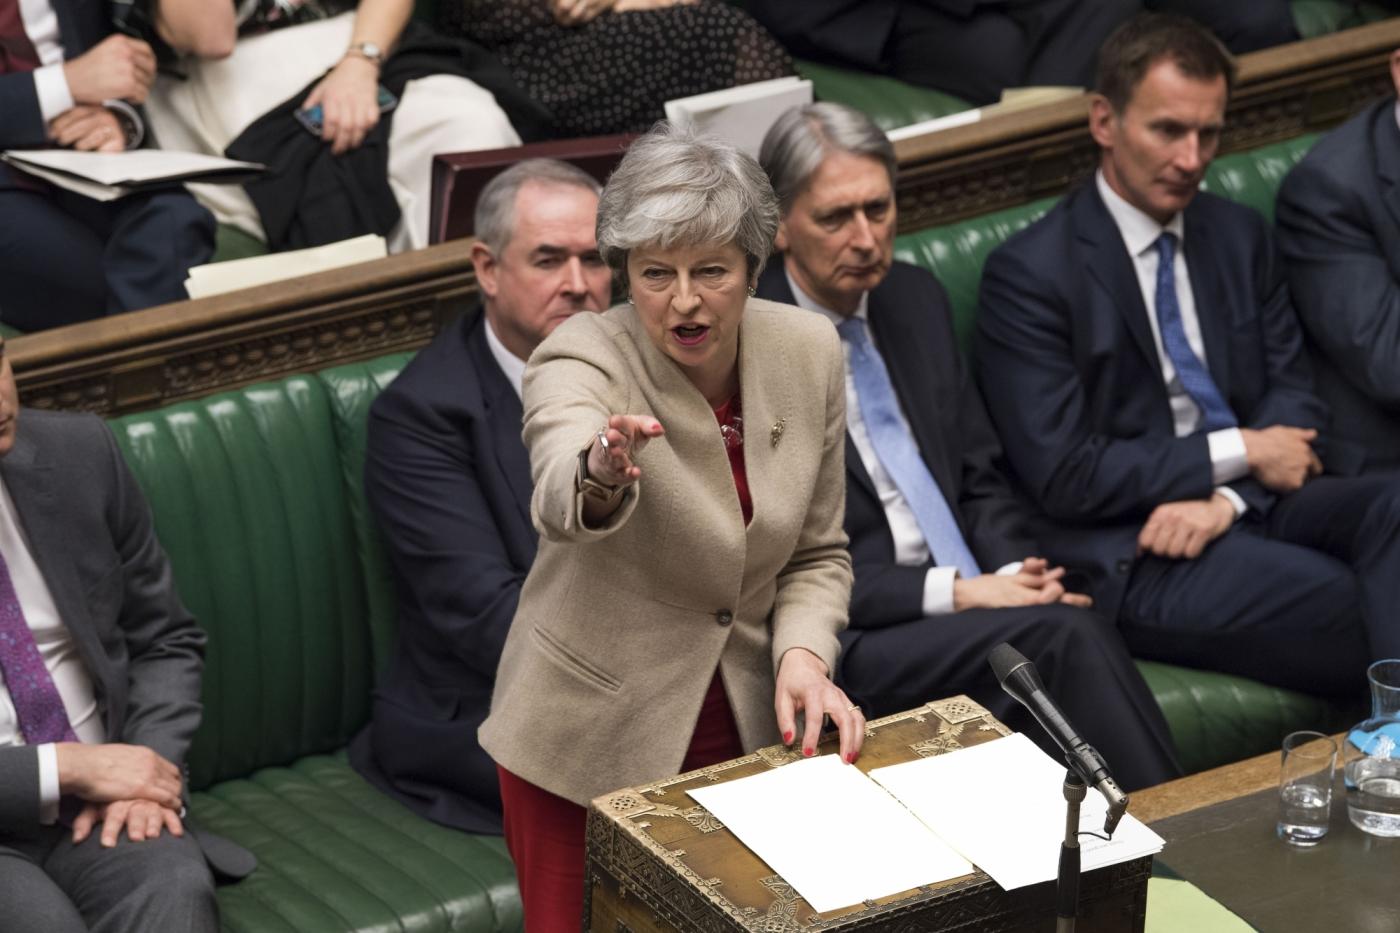 LONDON, March 29, 2019 (Xinhua) -- British Prime Minister Theresa May (Front) speaks during the debate in the House of Commons in London, Britain, on March 29, 2019. British lawmakers on Friday voted to reject Prime Minister Theresa May's Brexit deal, which has already been rejected twice in Parliament since January. (Xinhua/UK Parliament/Mark Duffy/IANS) by .